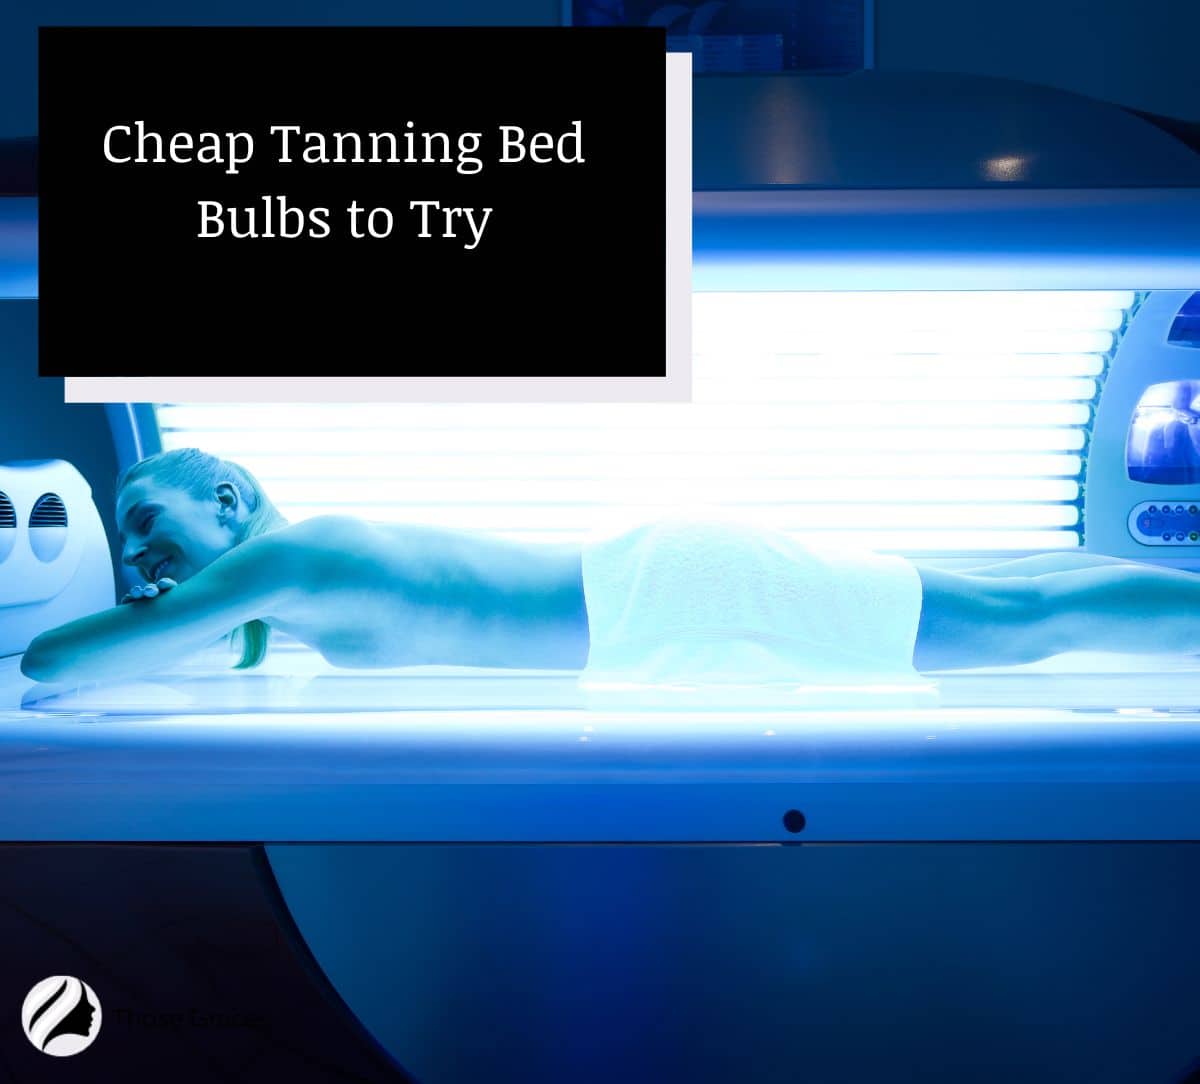 a woman enjoying her tanning session on the tanning bed with cheap tanning bed bulbs